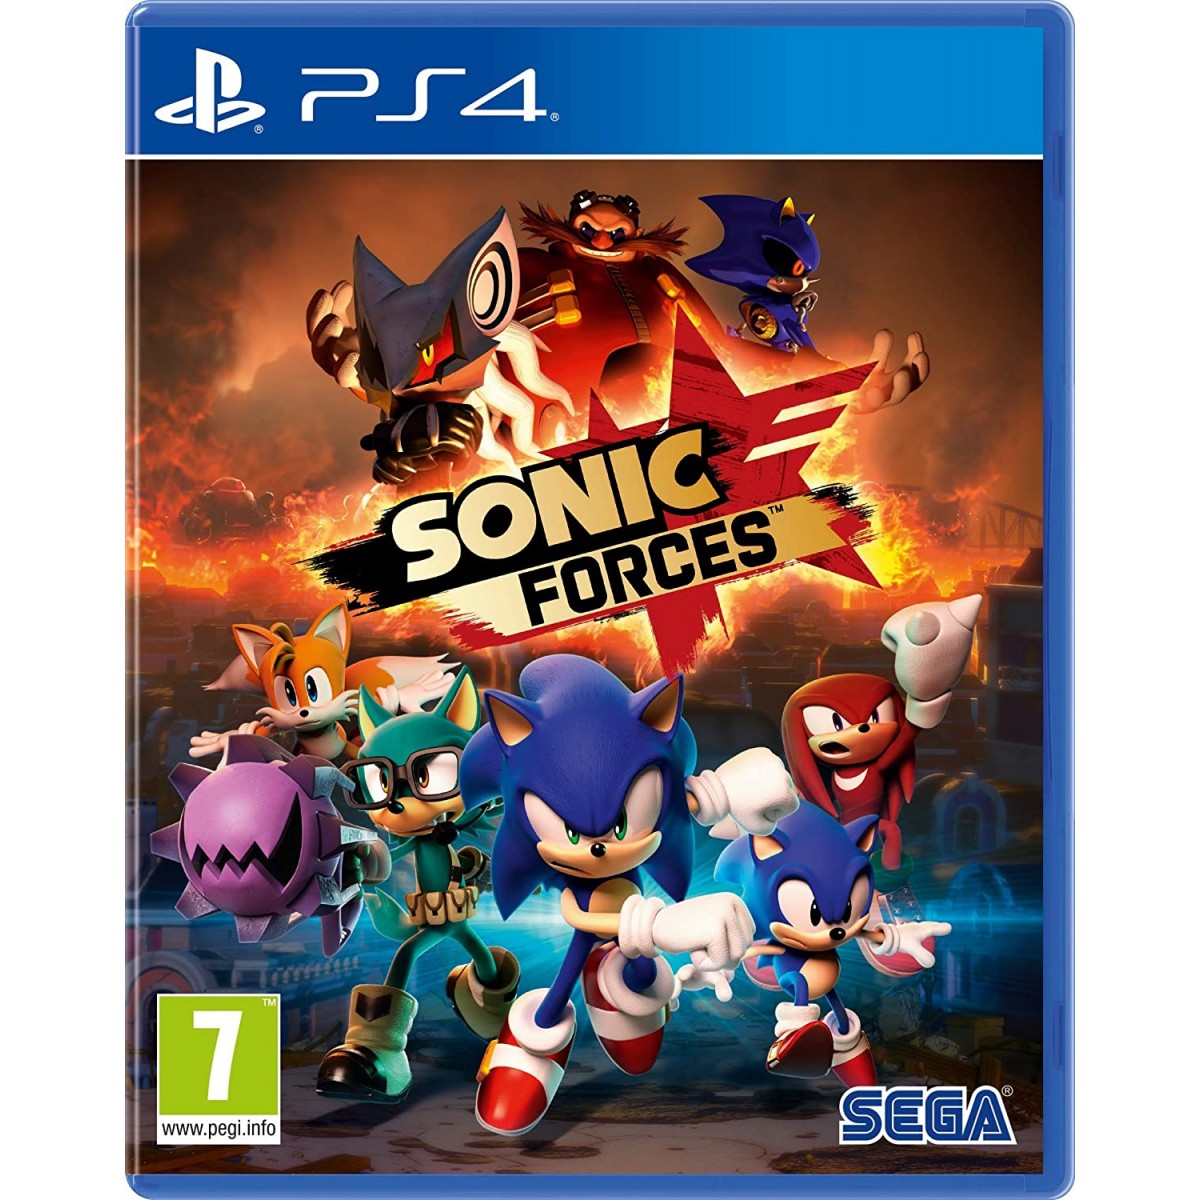 Videogioco Sonic Forces per PlayStation 4